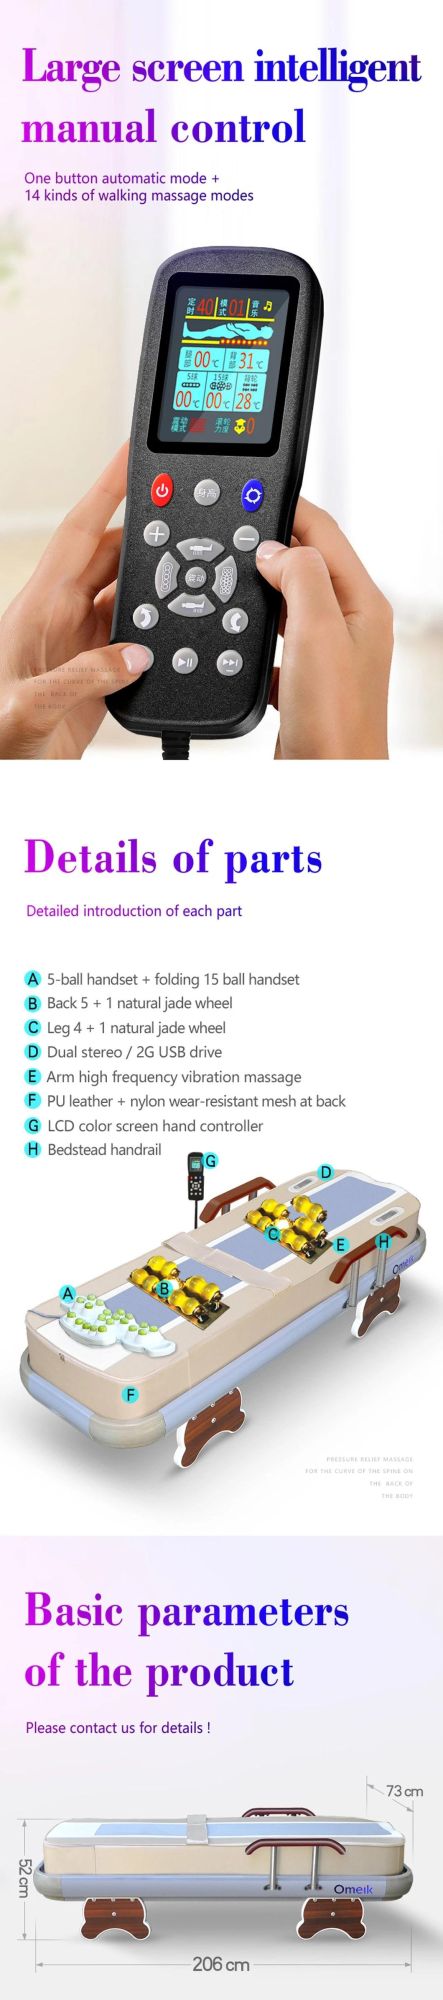 Professional Manufacture Warm Jade Heating Massage Bed Massage Table for Body Relex